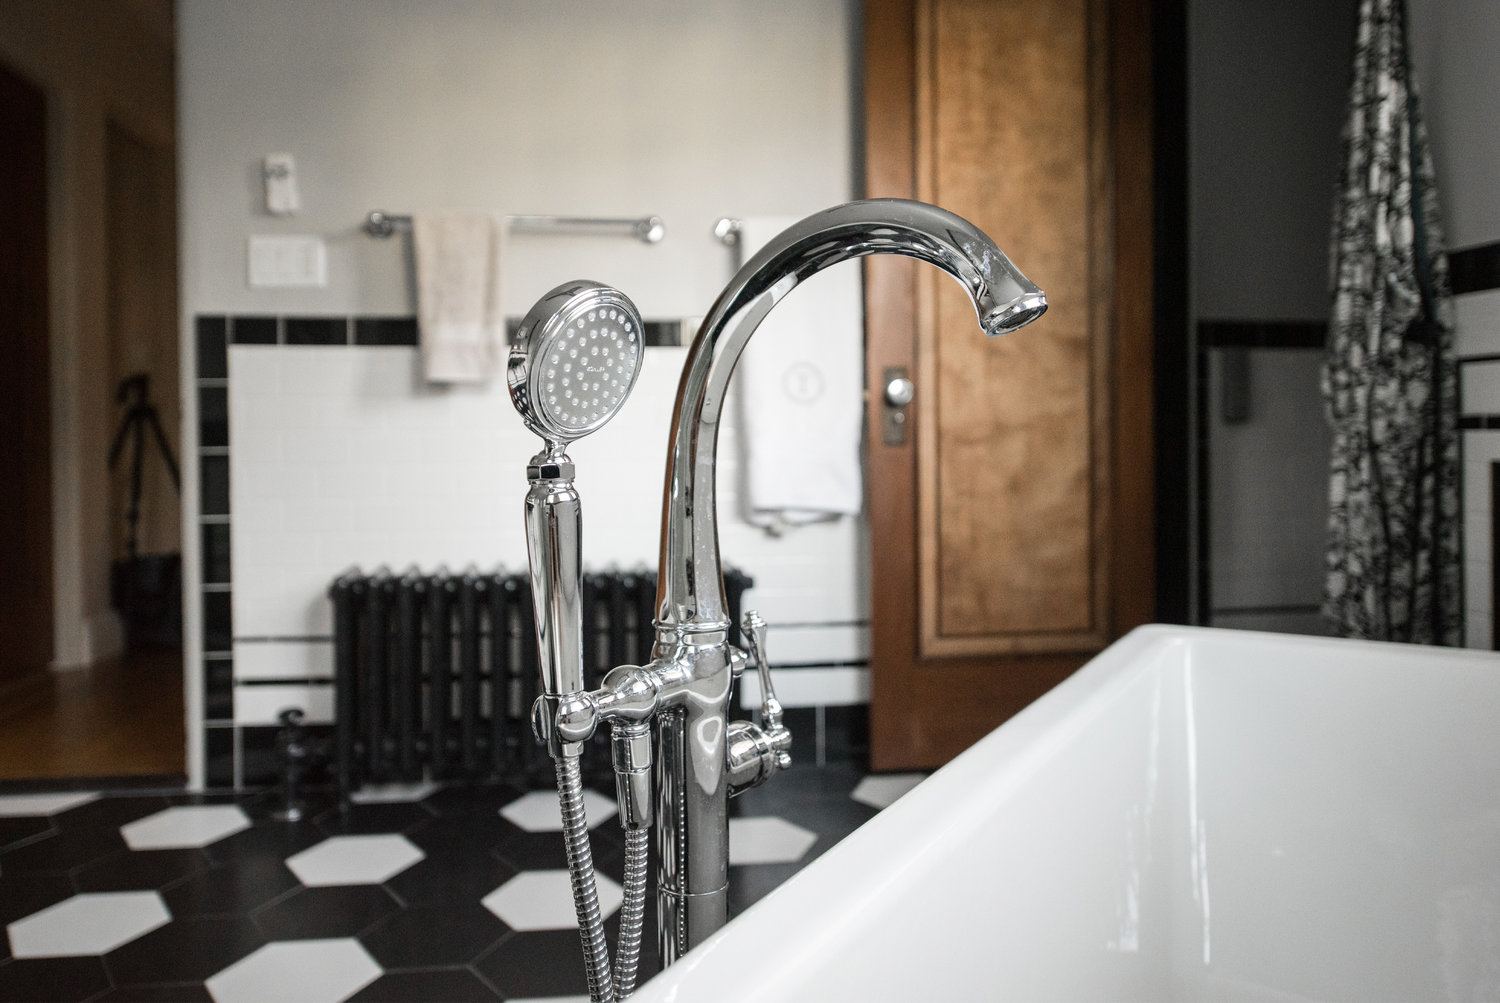 A floor-mounted tub filler was used for the new cast iron freestanding tub and plays off the lines of the sink console